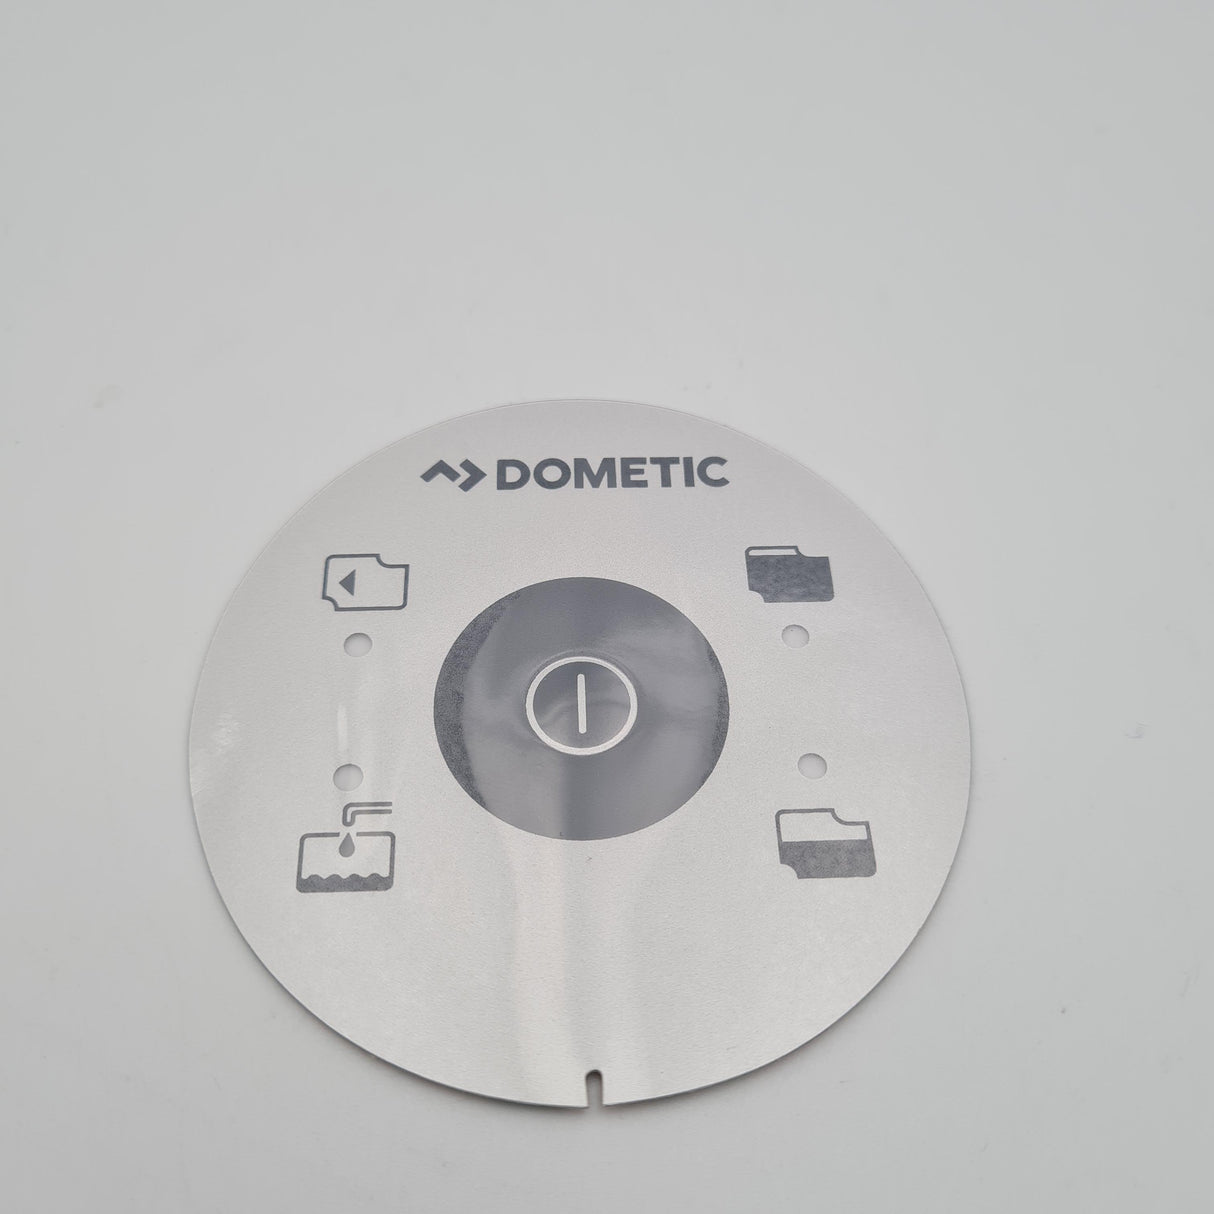 Dometic Toilet Control Switch Sticker / Decal - 242601729